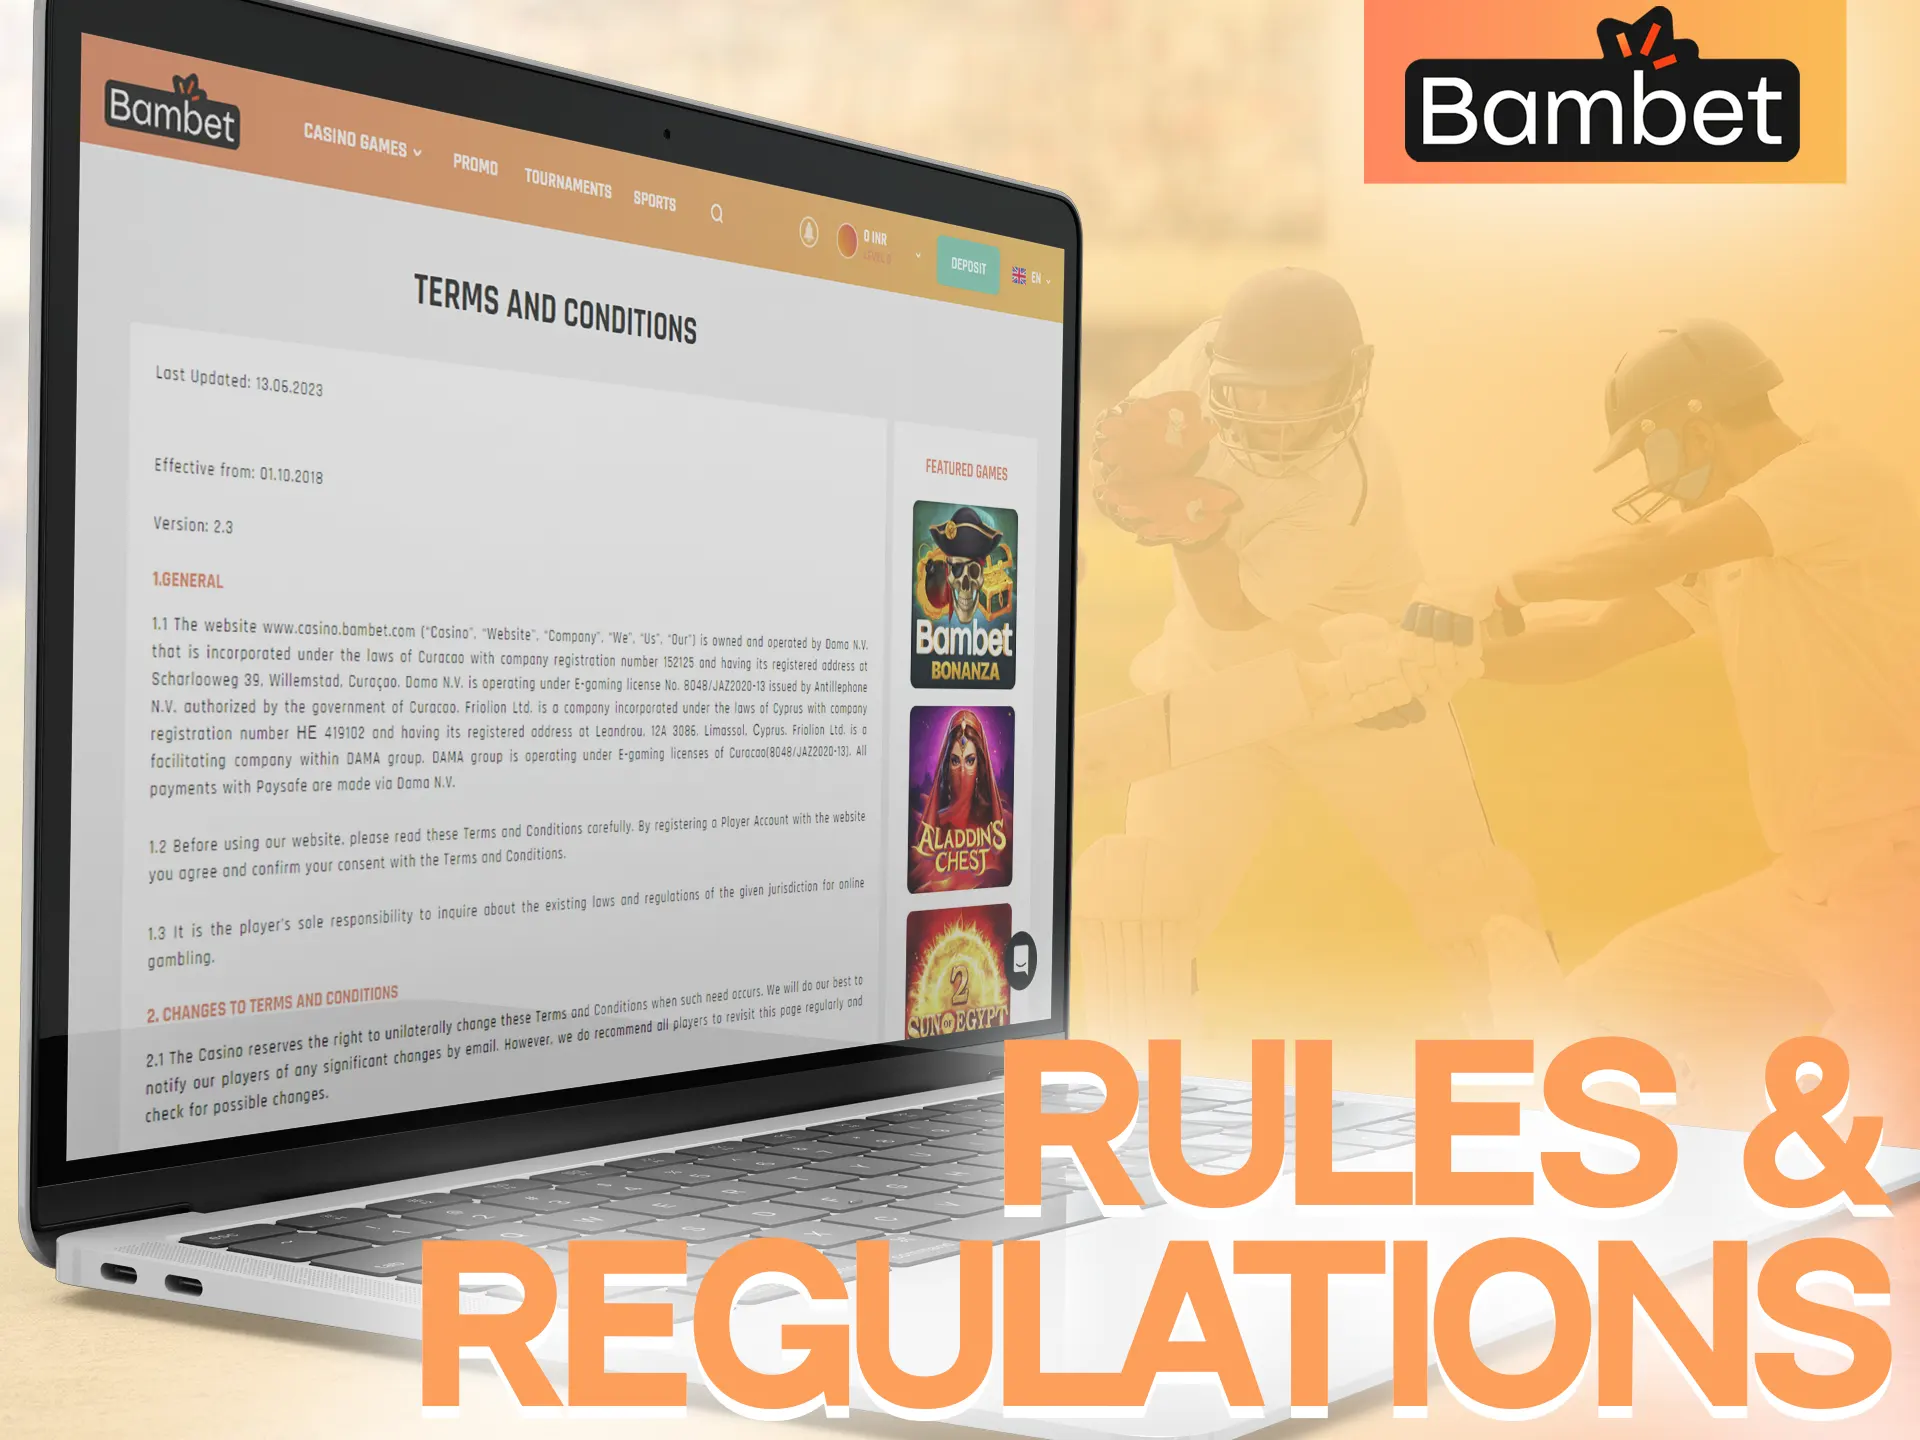 Get to know the simple rules of Bambet.